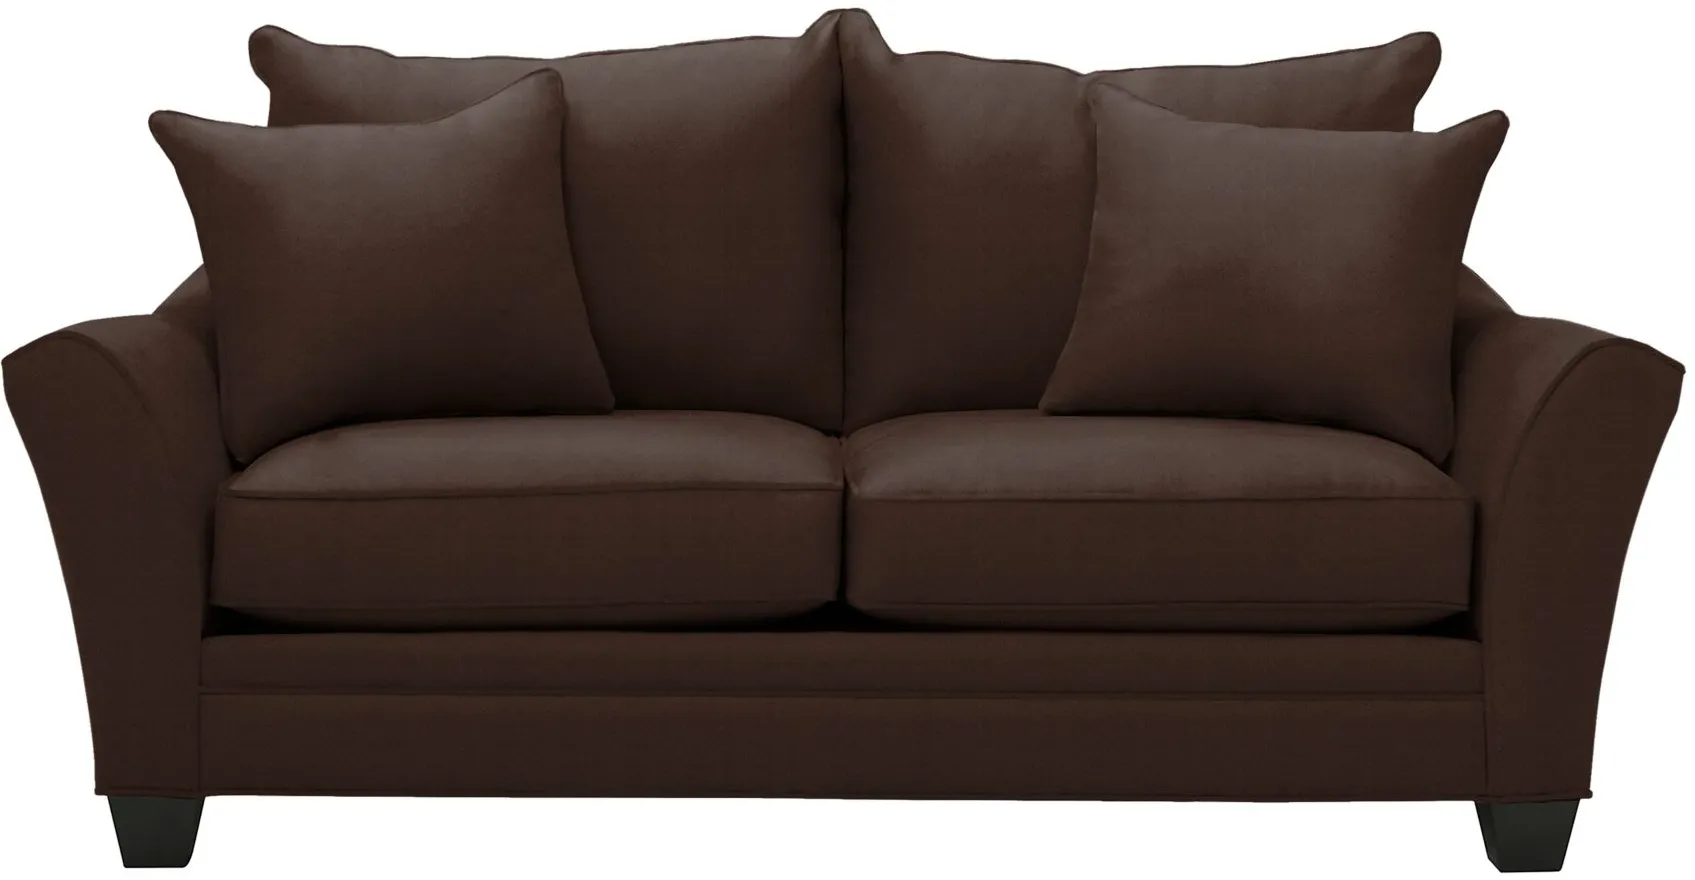 Briarwood Apartment Sleeper Sofa in Suede So Soft Chocolate by H.M. Richards